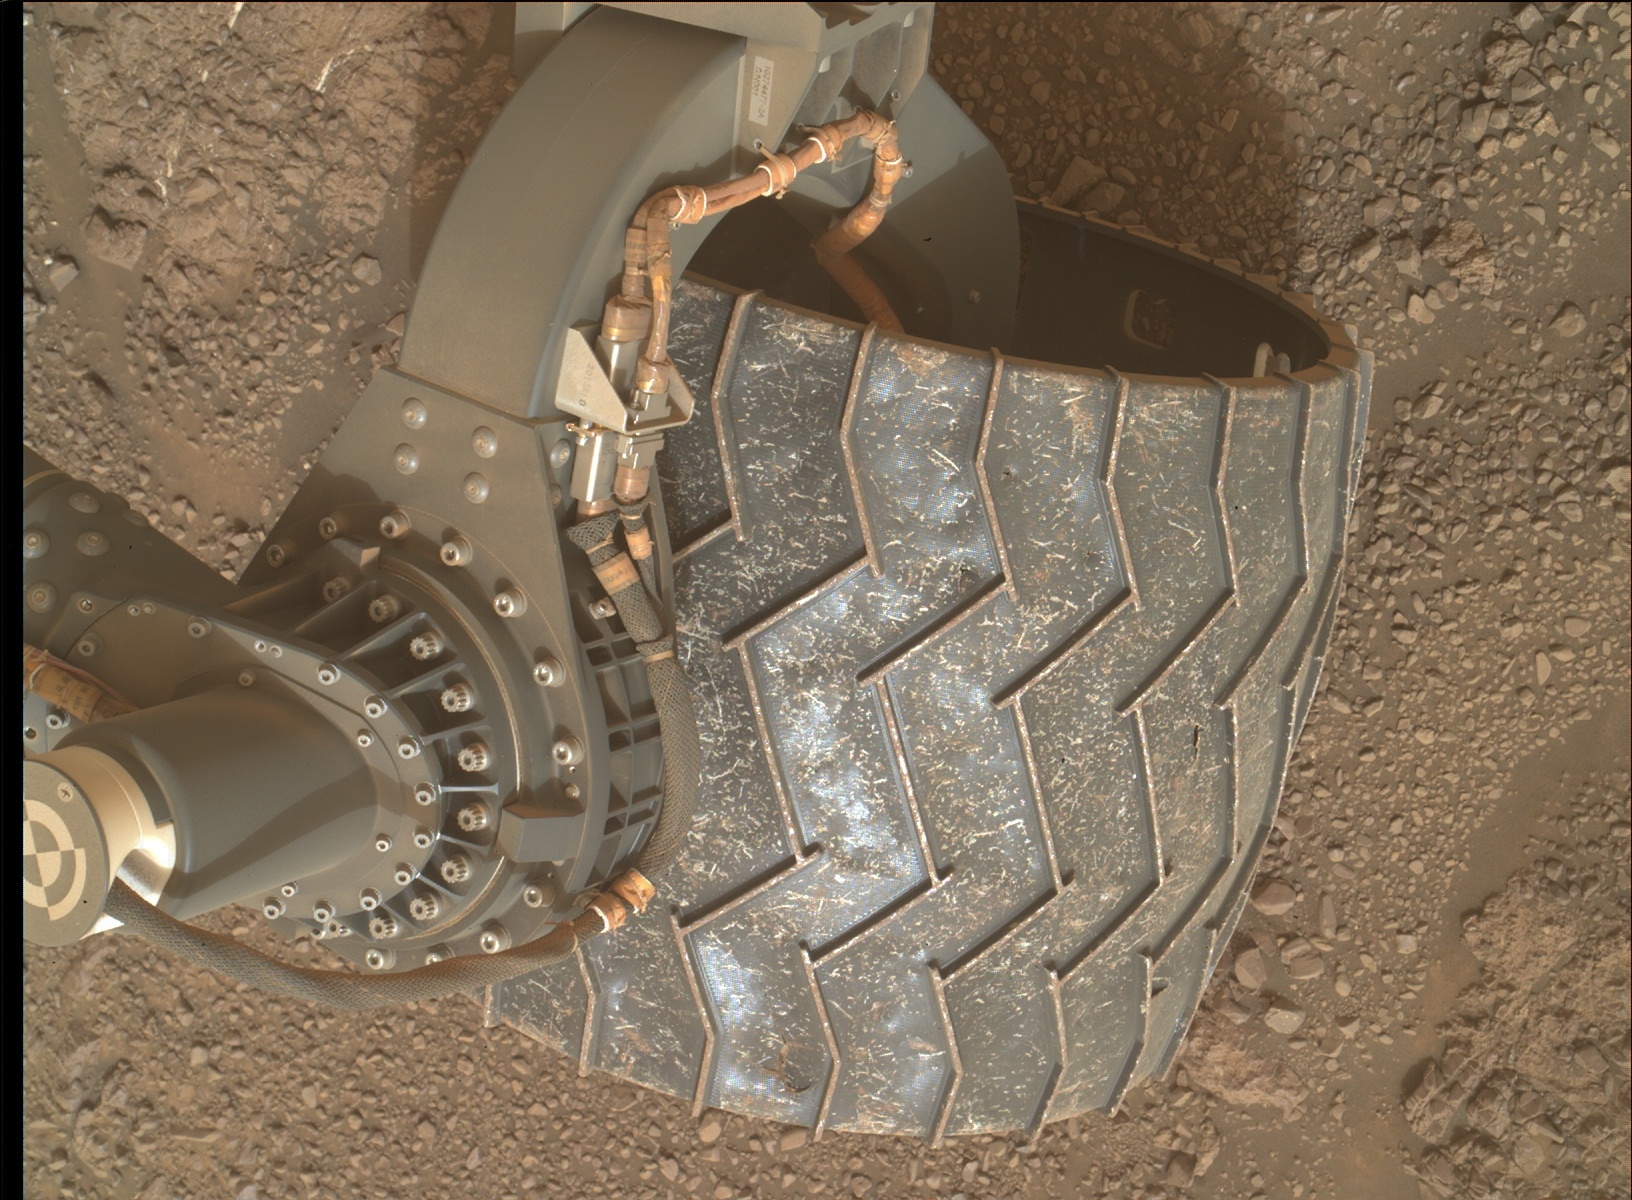 Nasa's Mars rover Curiosity acquired this image using its Mars Hand Lens Imager (MAHLI) on Sol 2296